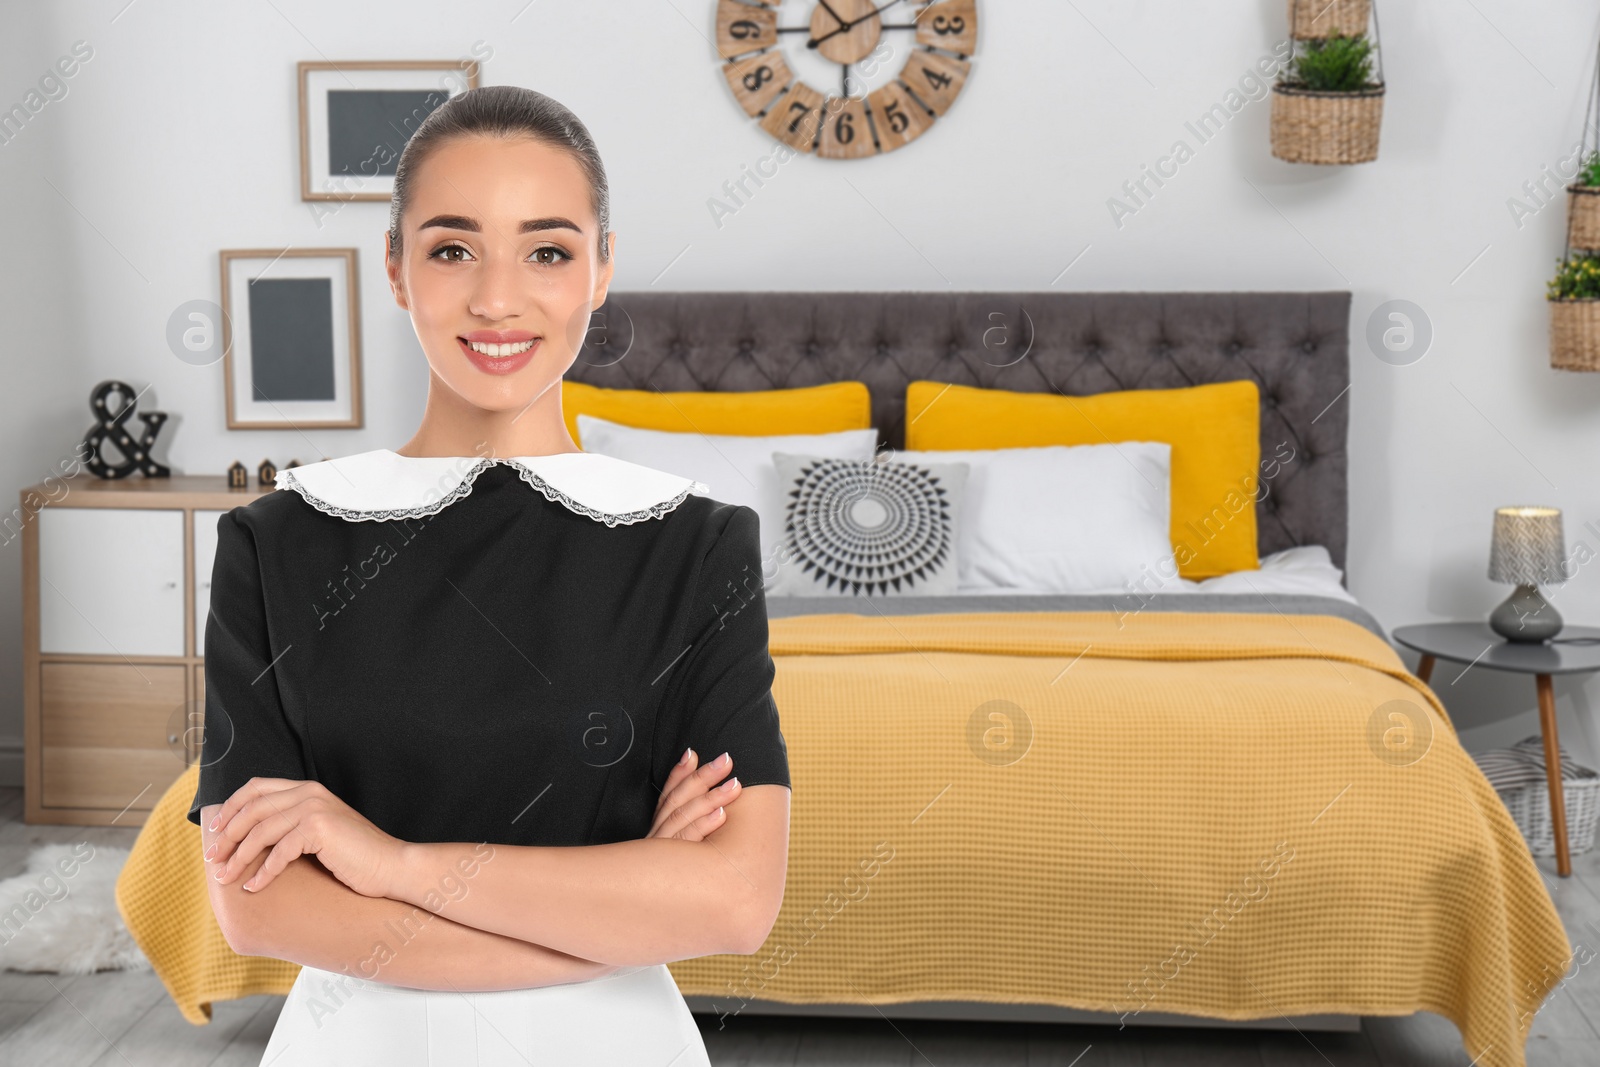 Image of Beautiful chambermaid near bed in hotel room